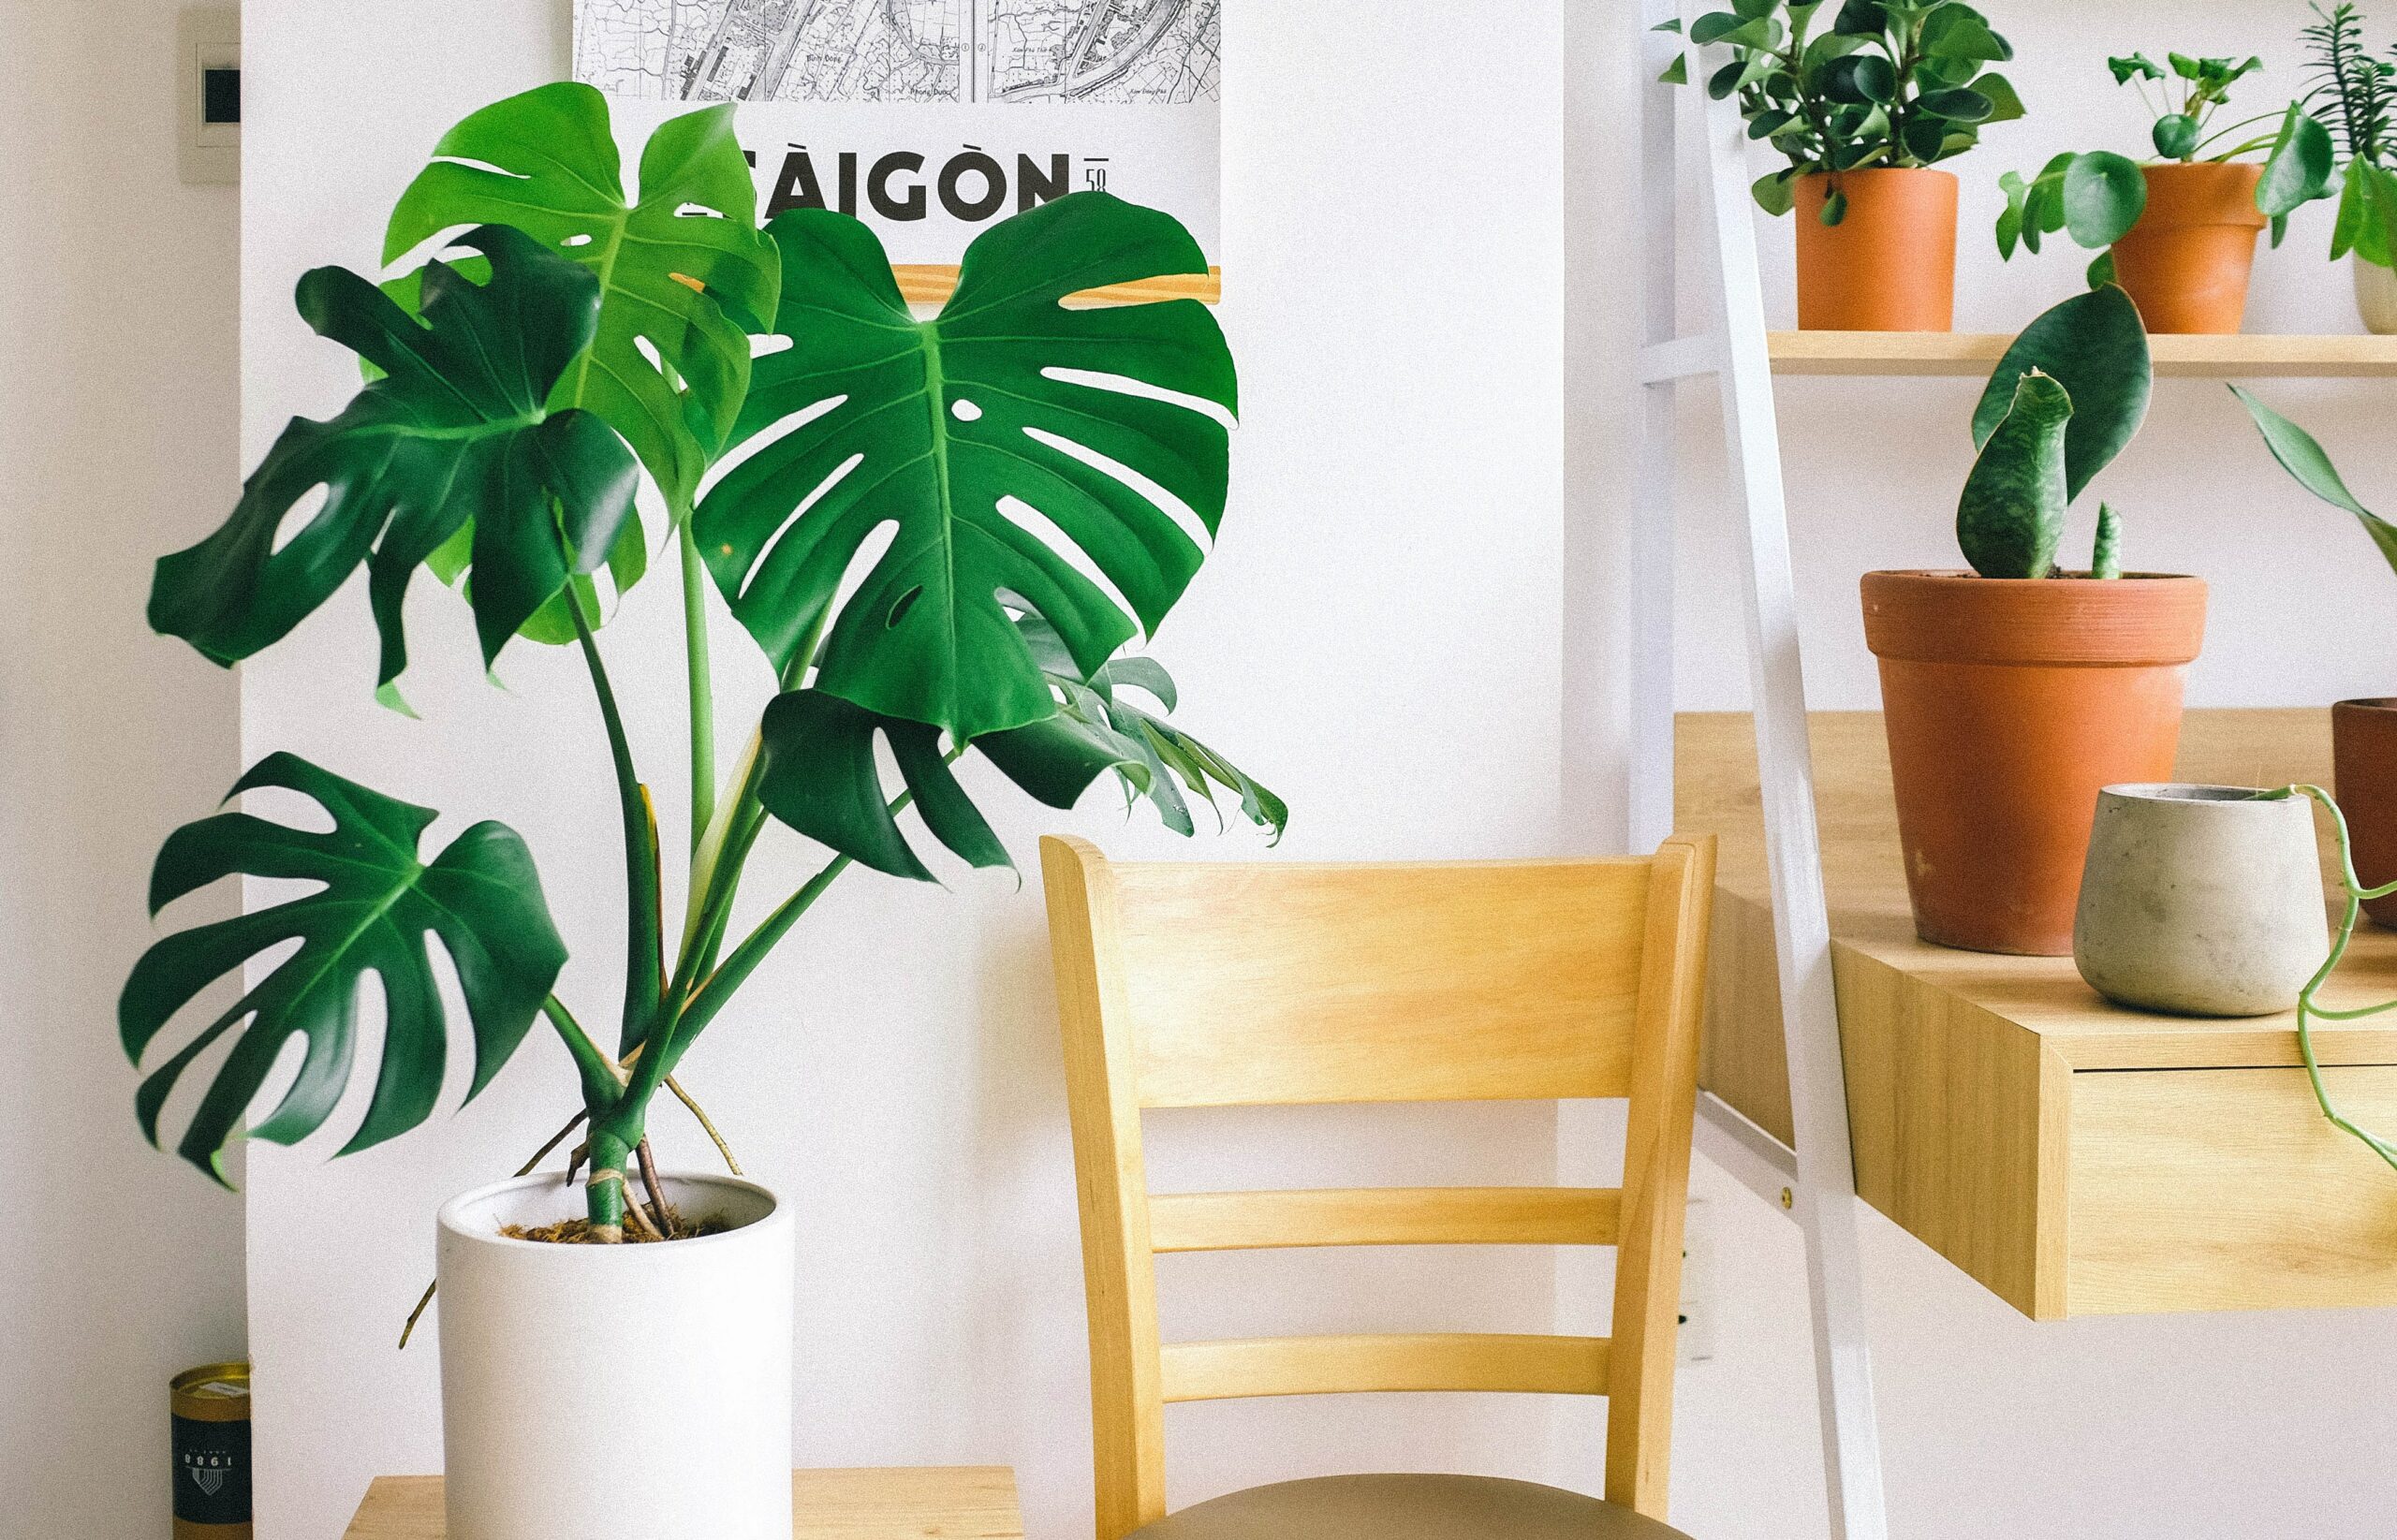 How to Decorate Your Home with Greenery